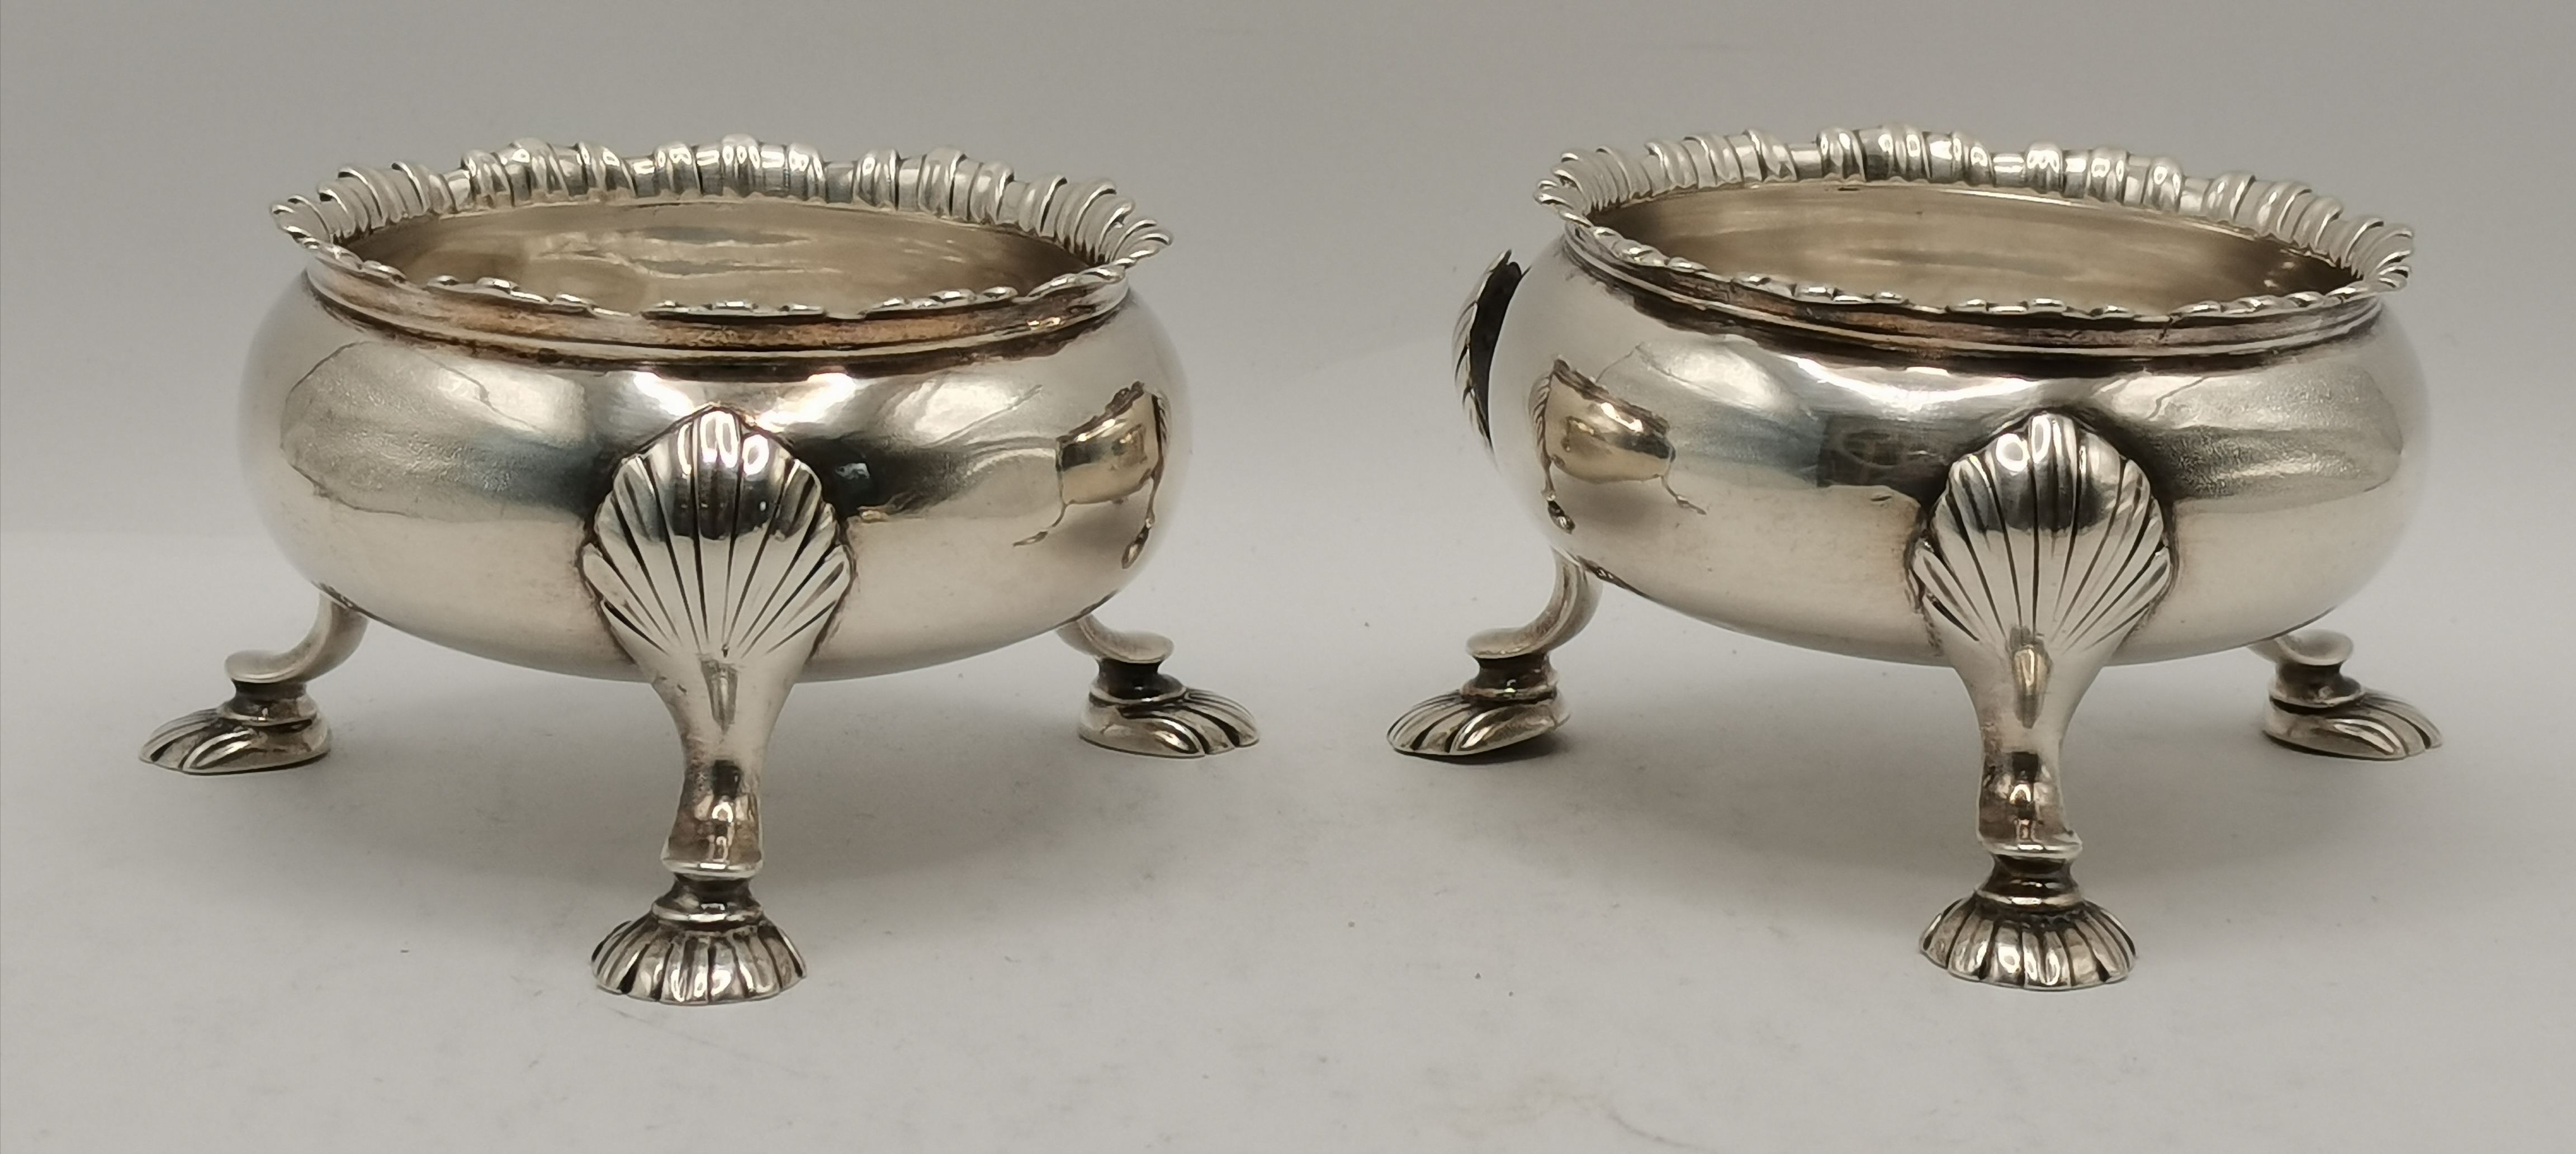 Two pairs of open silver salts - Image 2 of 5